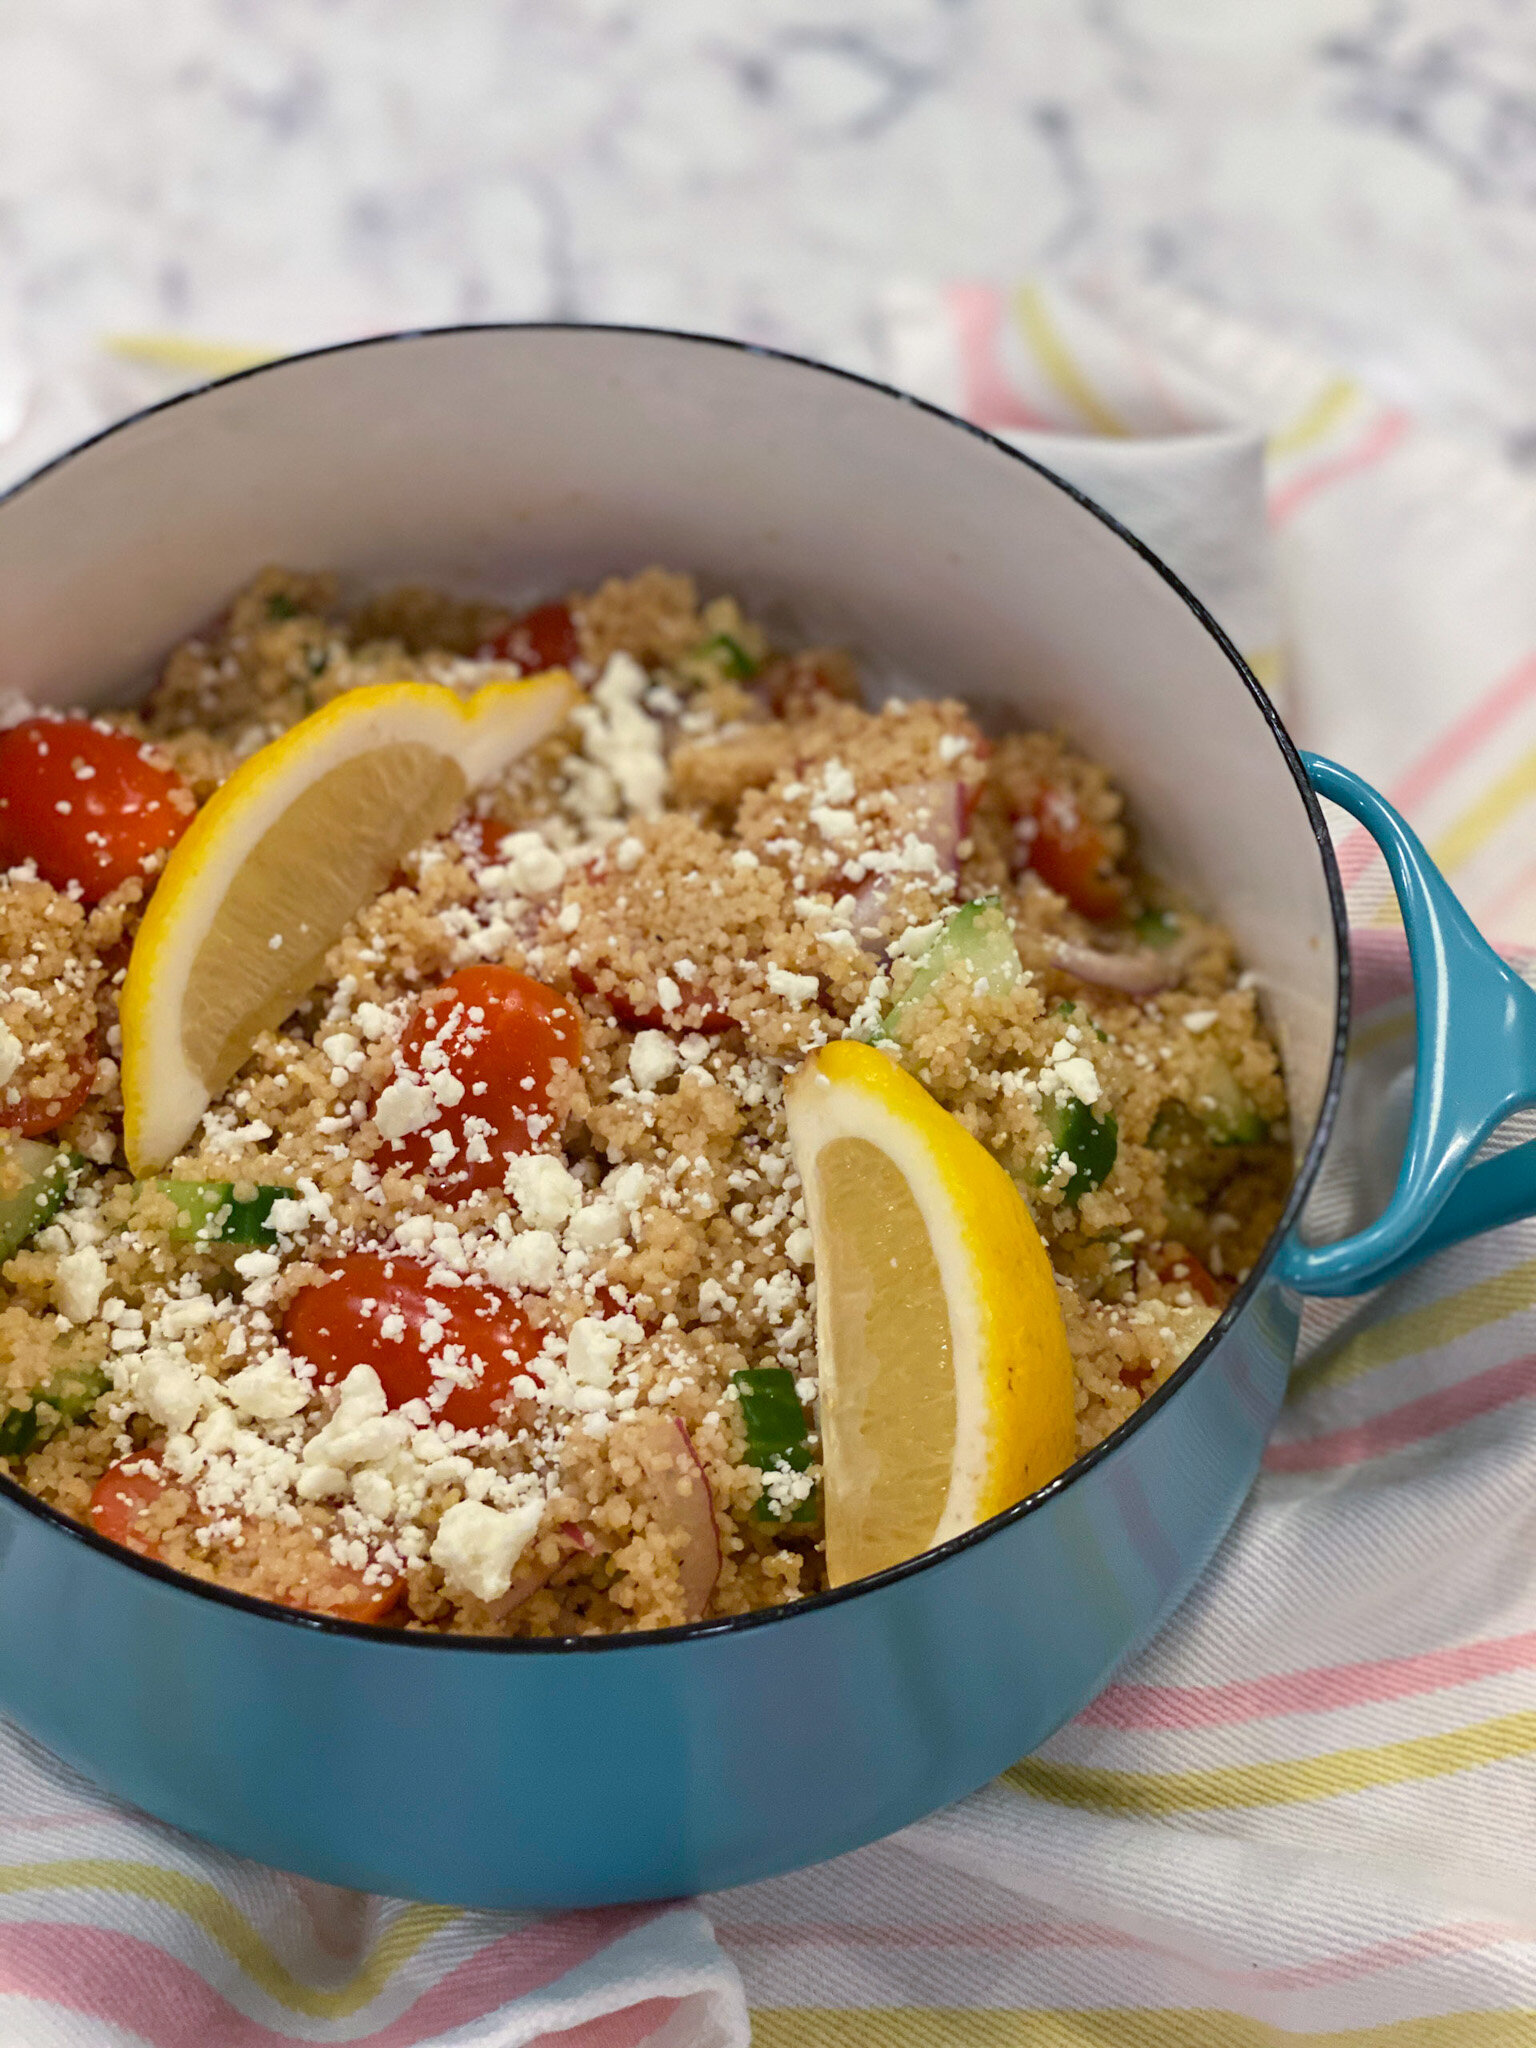 Couscous+Salad+with+cucumber+tomatoes+and+red+onion.jpg